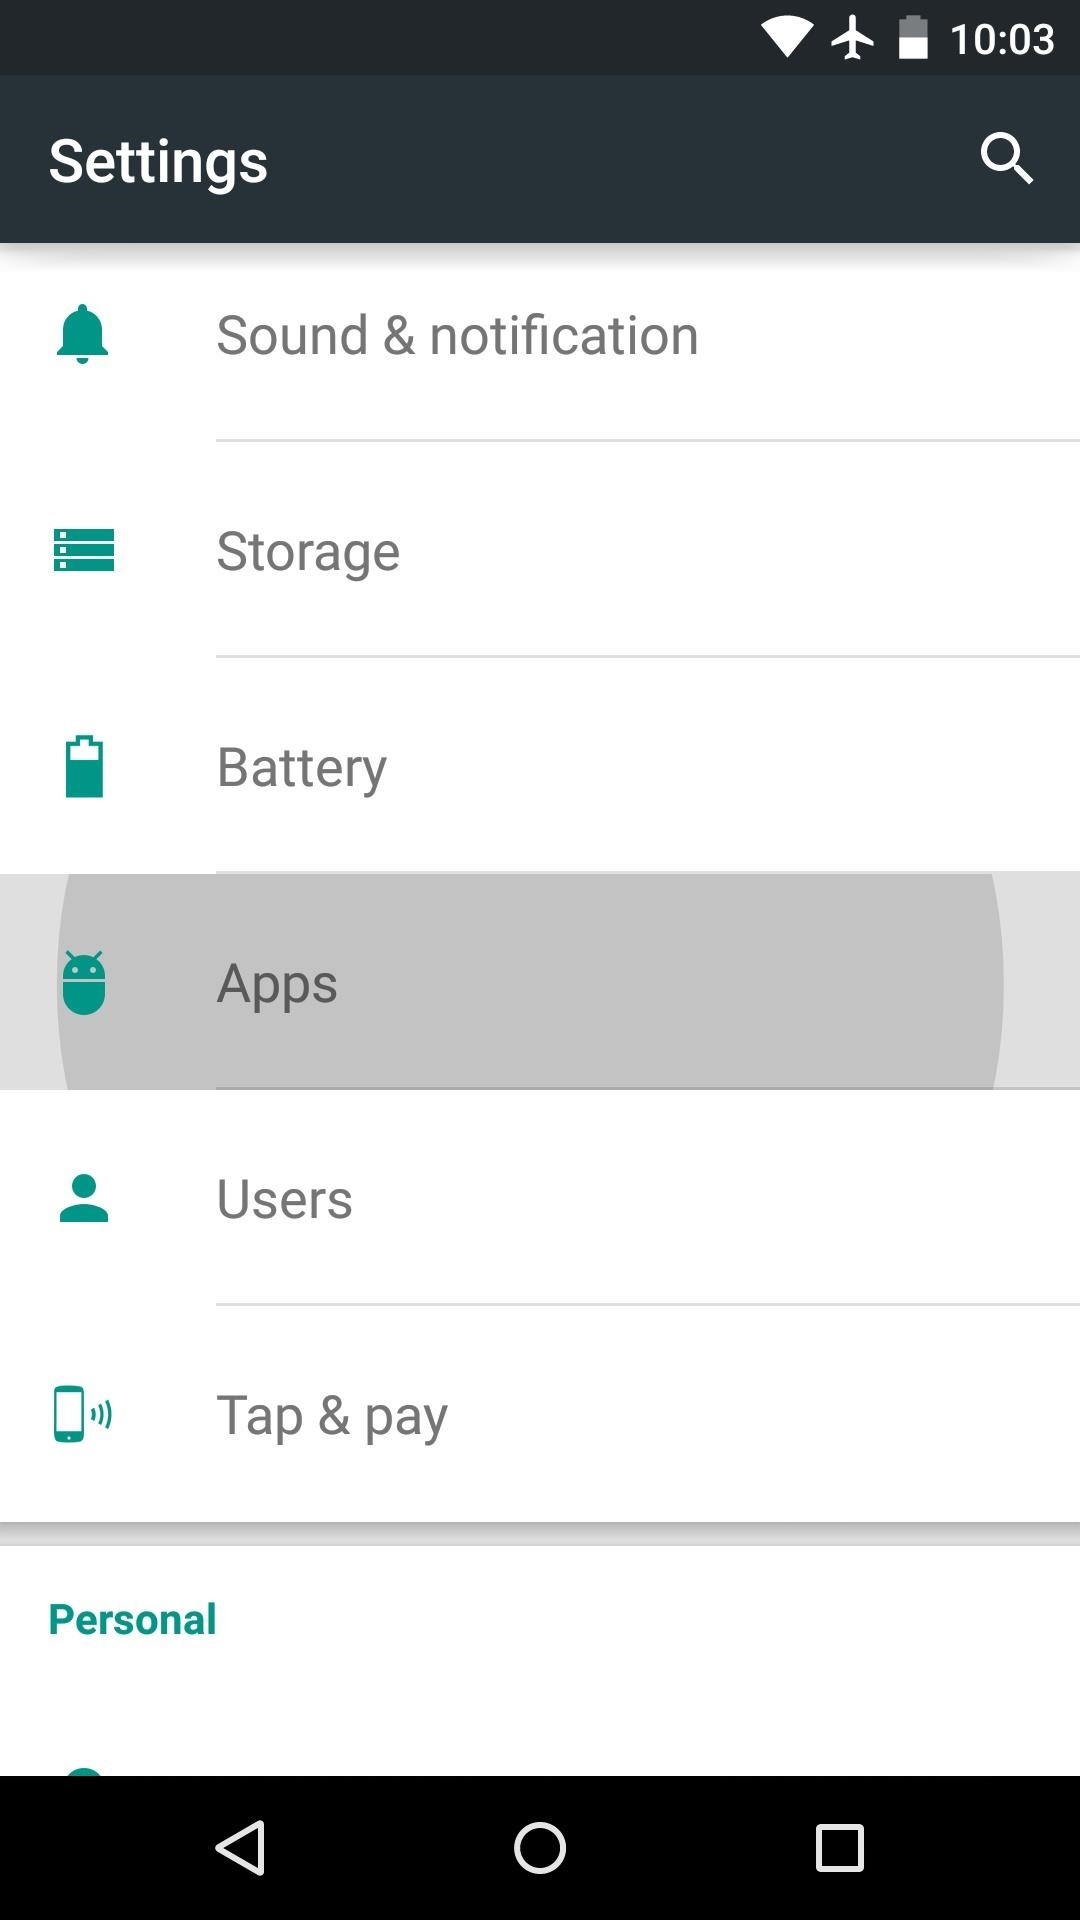 What's Draining Your Android's Battery? Find Out & Fix It for Good